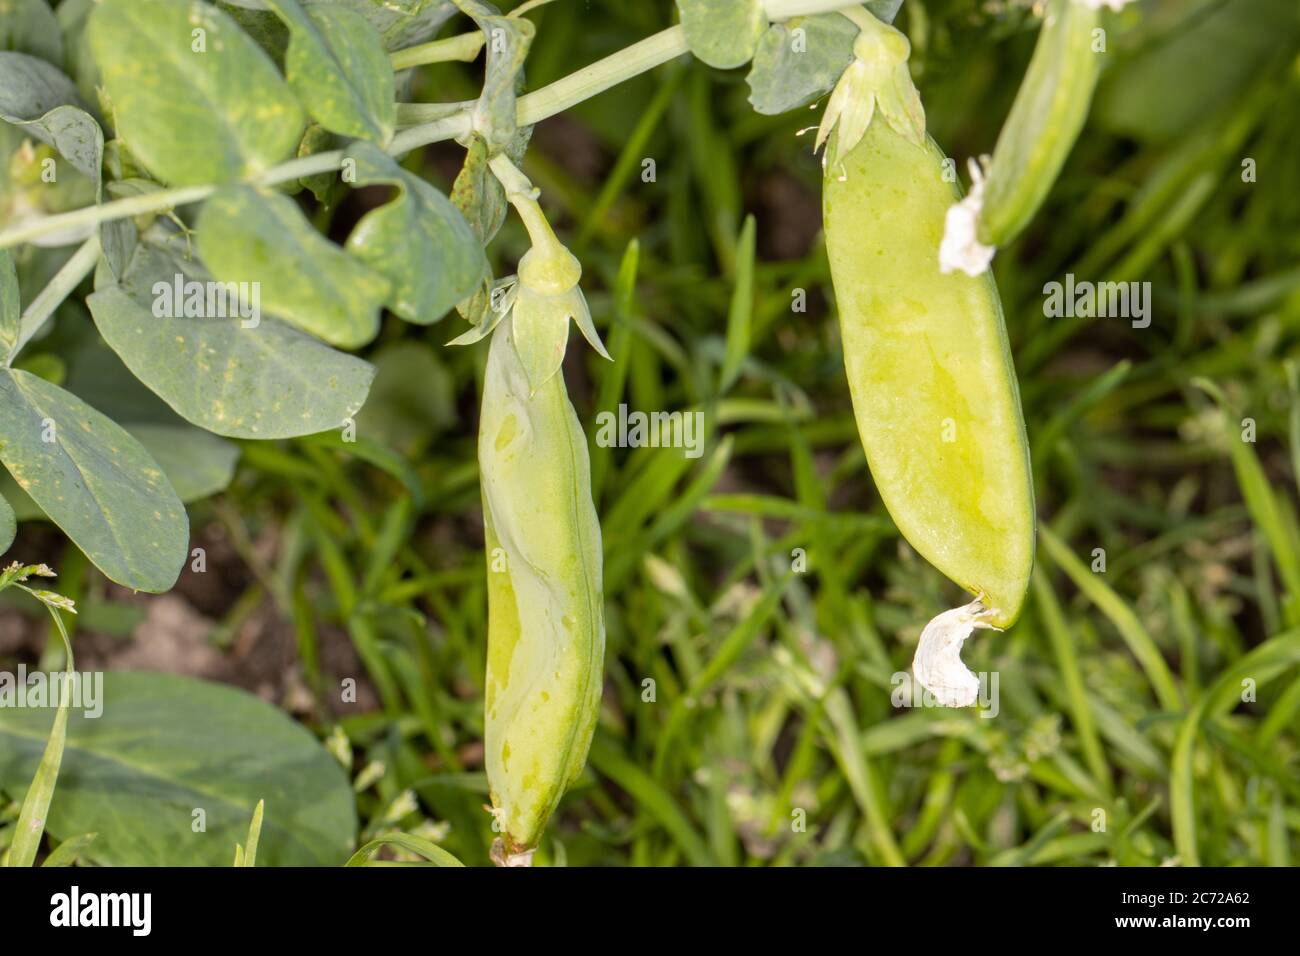 Snow peas growing on the vine in home garden setting Stock Photo